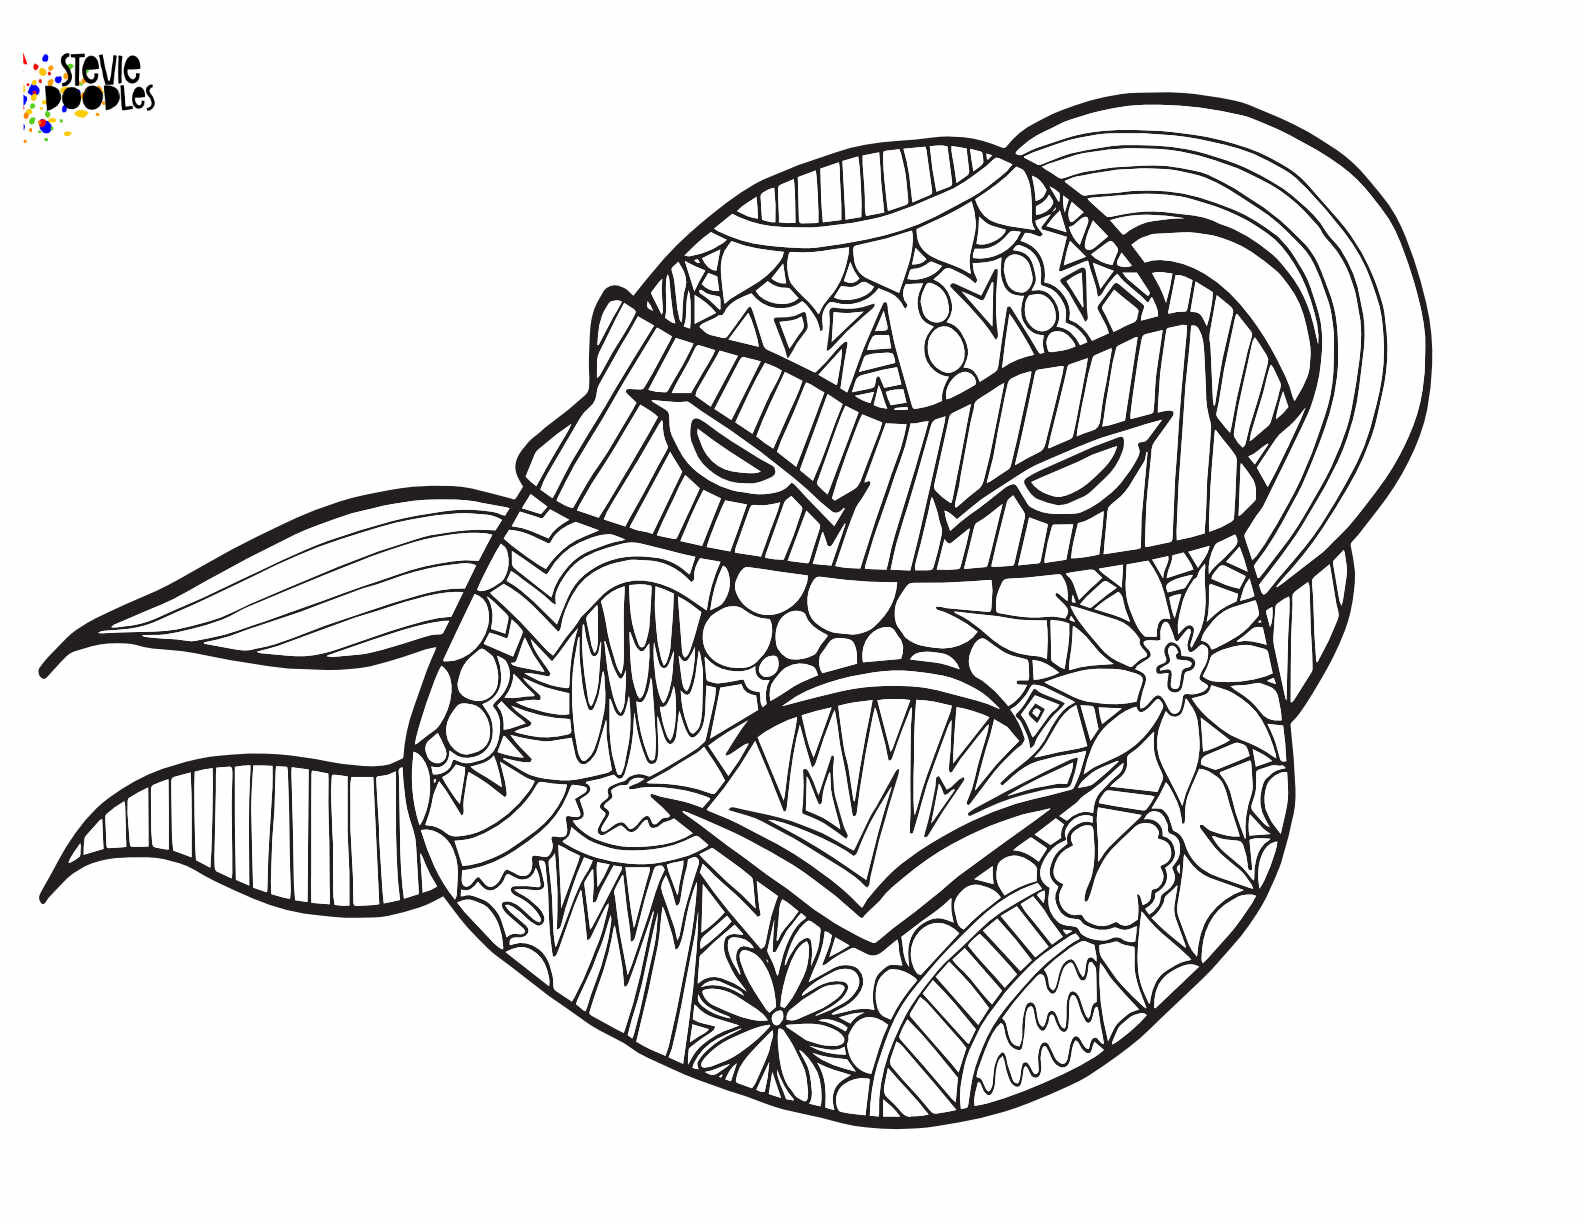 3 Free Teenage Mutant Ninja Turtles Coloring pages CLICK HERE TO DOWNLOAD AND PRINT THE PAGE ABOVE!